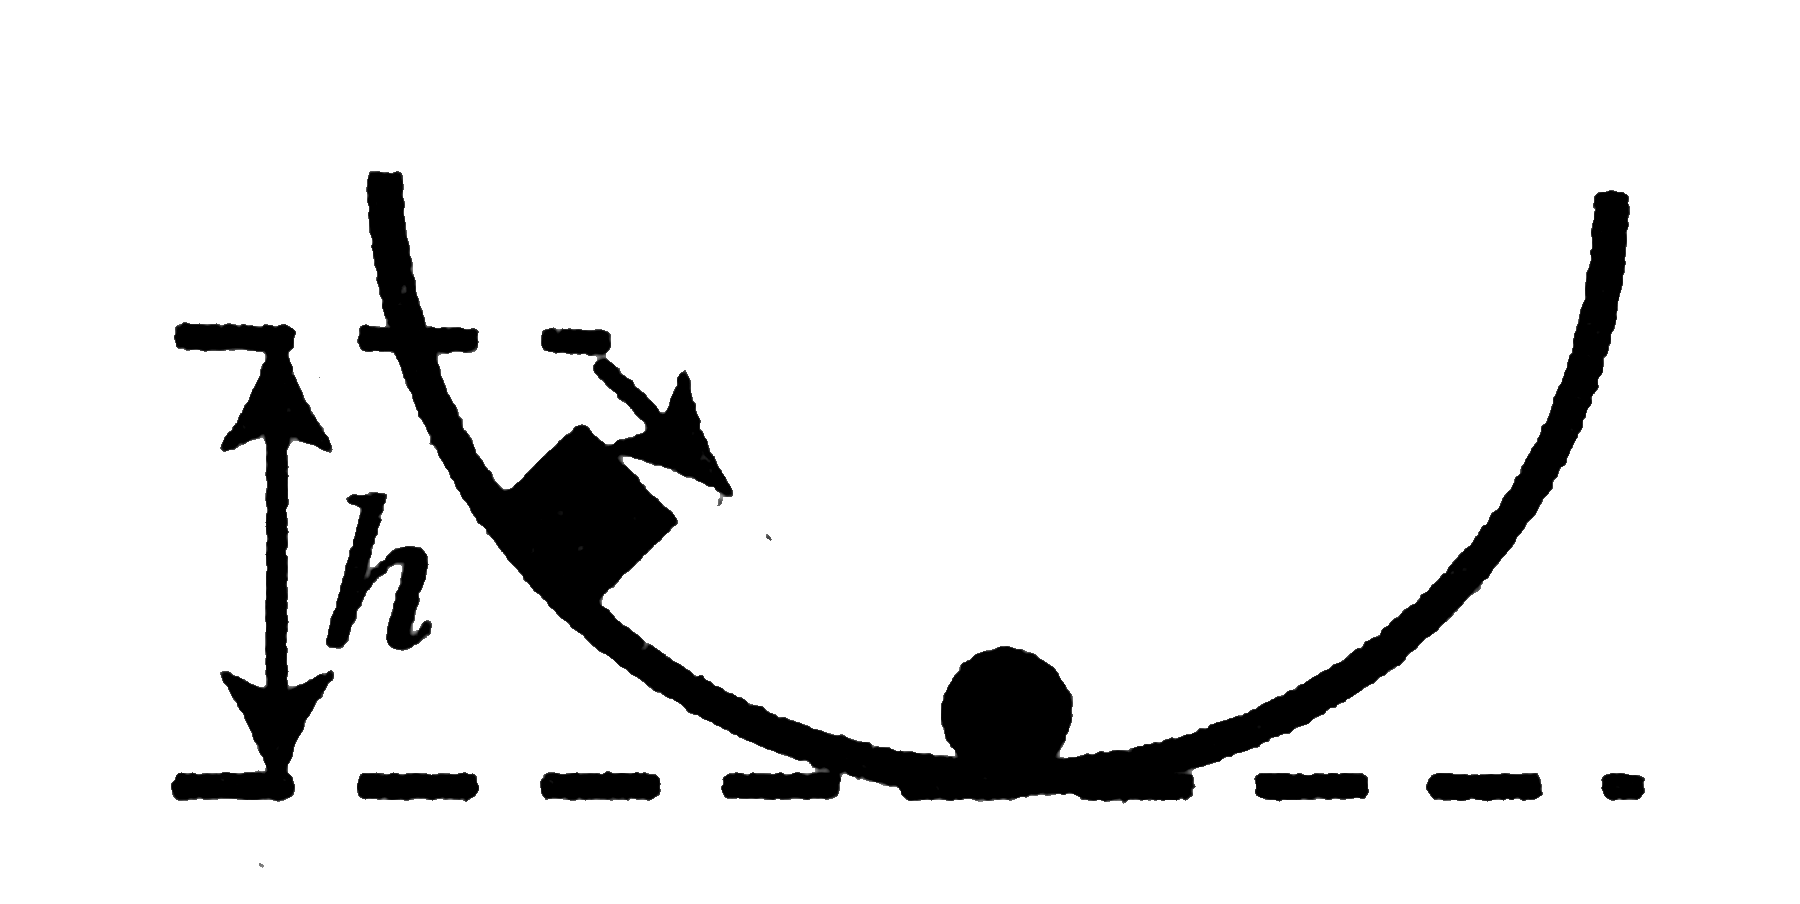 A block of mass m starts from rest and slides down a frictionless semi-circular track from a height h as shown. When it reaches the lowest point of the track, it collides with a stationary piece of putty also having mass m. If the block and the putty . stick together and continue to slide, the maximum height that the block-putty system could reach is